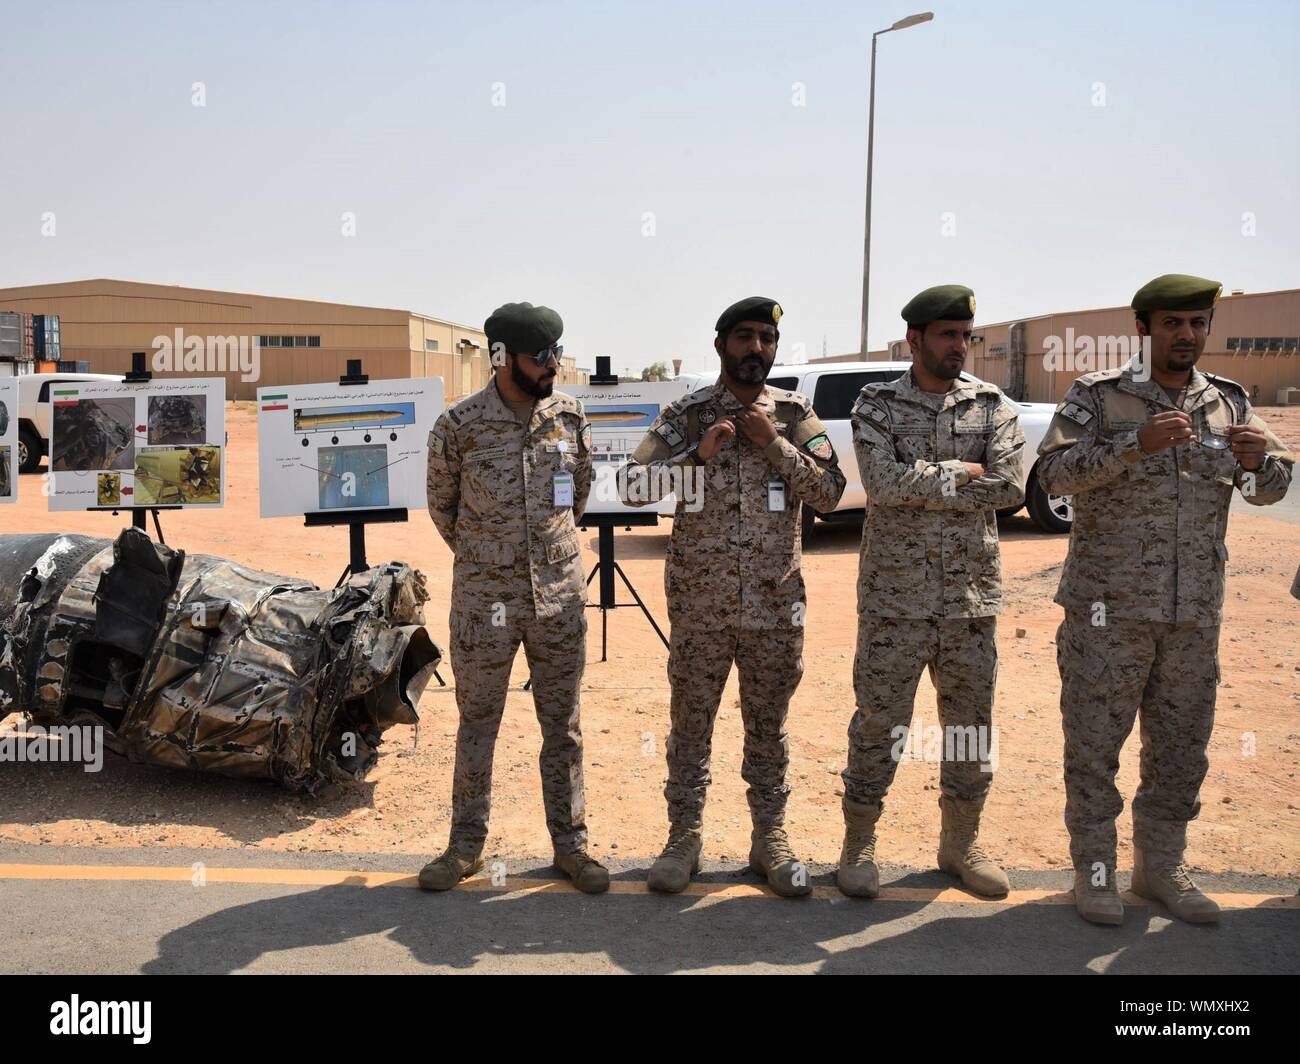 (190905) -- RIYADH, Sept. 5, 2019 (Xinhua) -- Saudi army officers are seen at a military facility in Al Kharj, south of Riyadh, Saudi Arabia, on Sept. 5, 2019. Saudi-led coalition involved in a war in Yemen on Thursday intercepted a drone launched by Houthis towards Saudi border city Khamis Mushayt, Saudi Press Agency reported. (Xinhua/Tu Yifan) Stock Photo